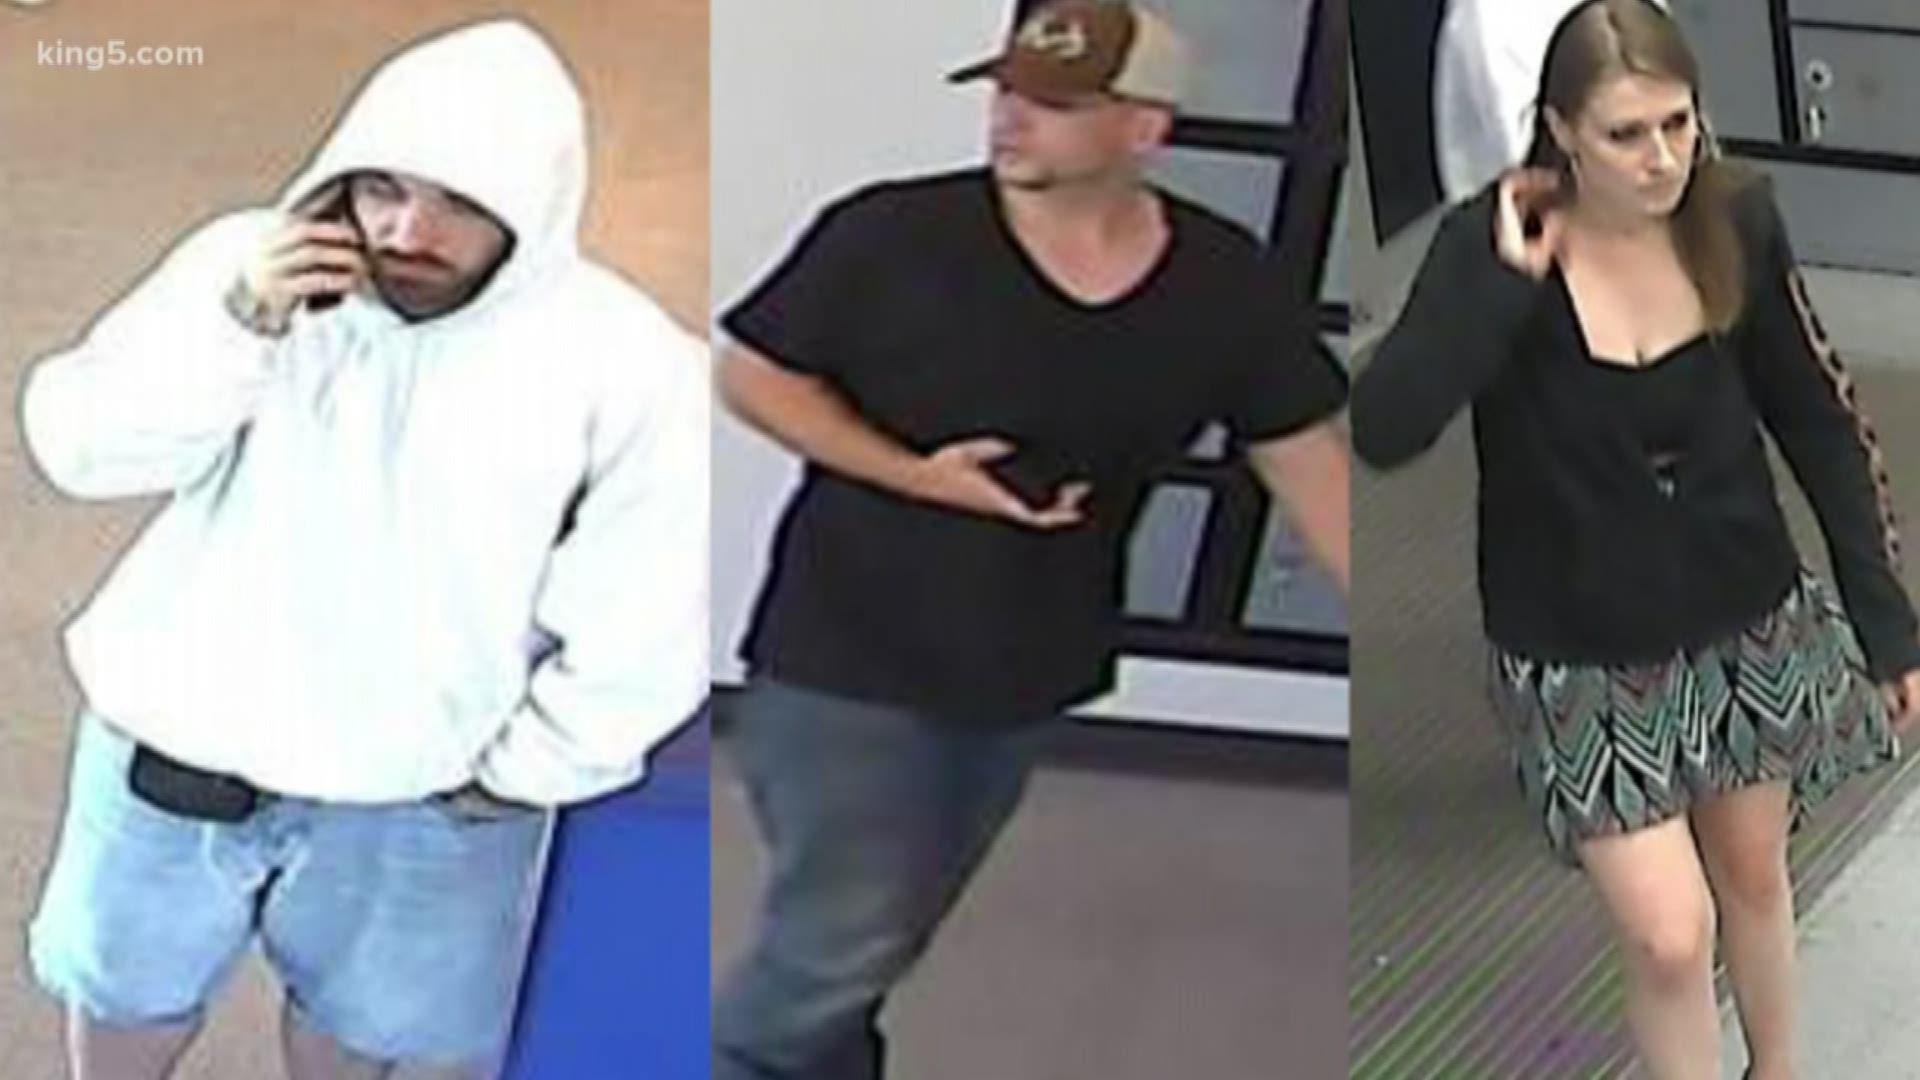 The U.S. Postal Inspection Service is looking for three people suspected of breaking into P.O. boxes and stealing mail from post offices in Auburn and Milton. KING 5's Ted Land reports.